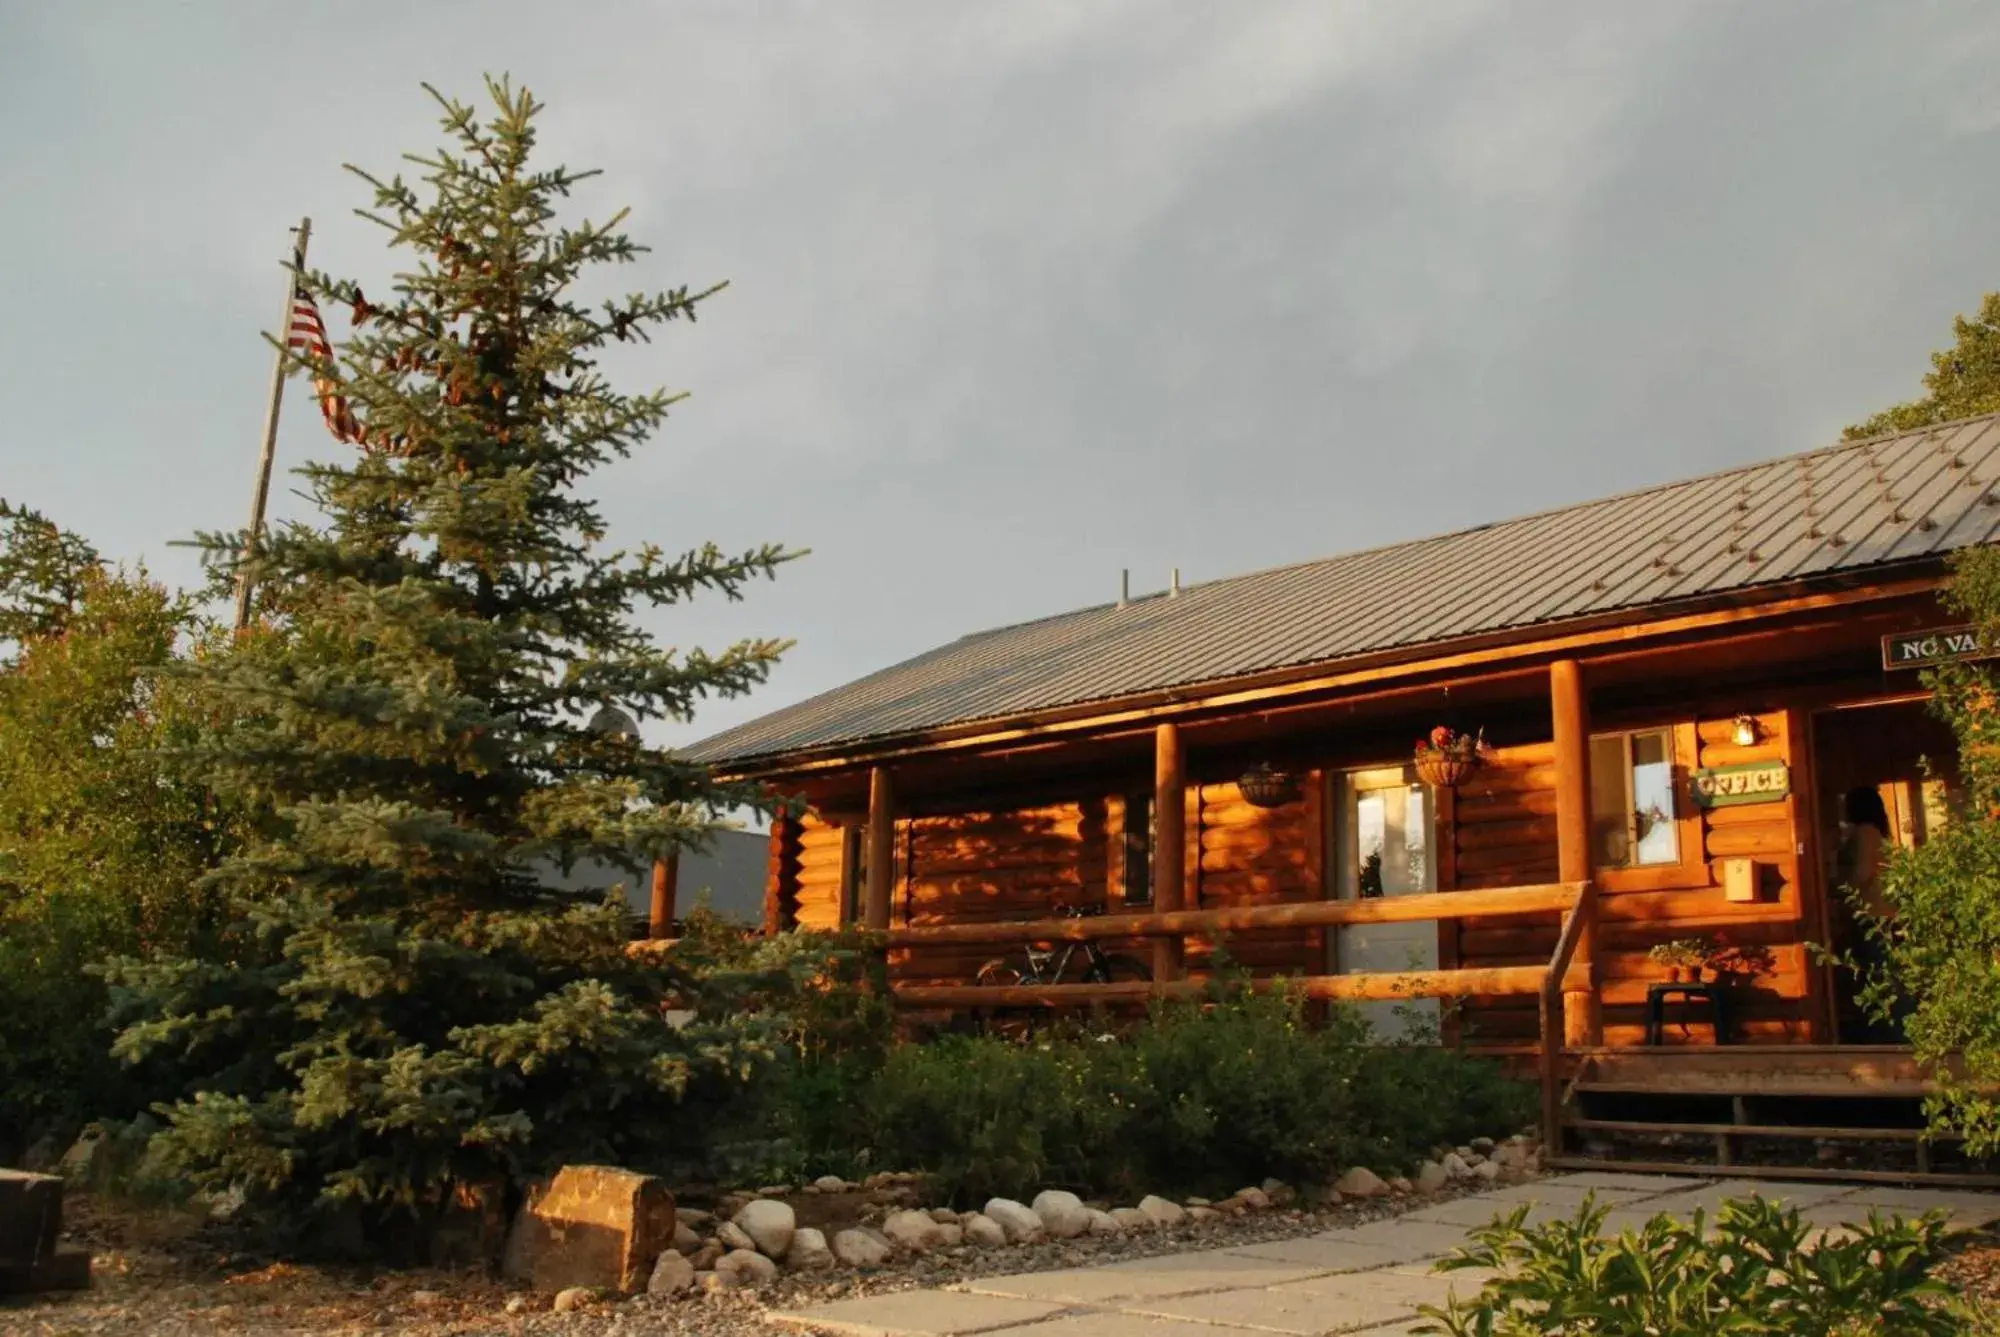 Property Building in Teton Valley Cabins